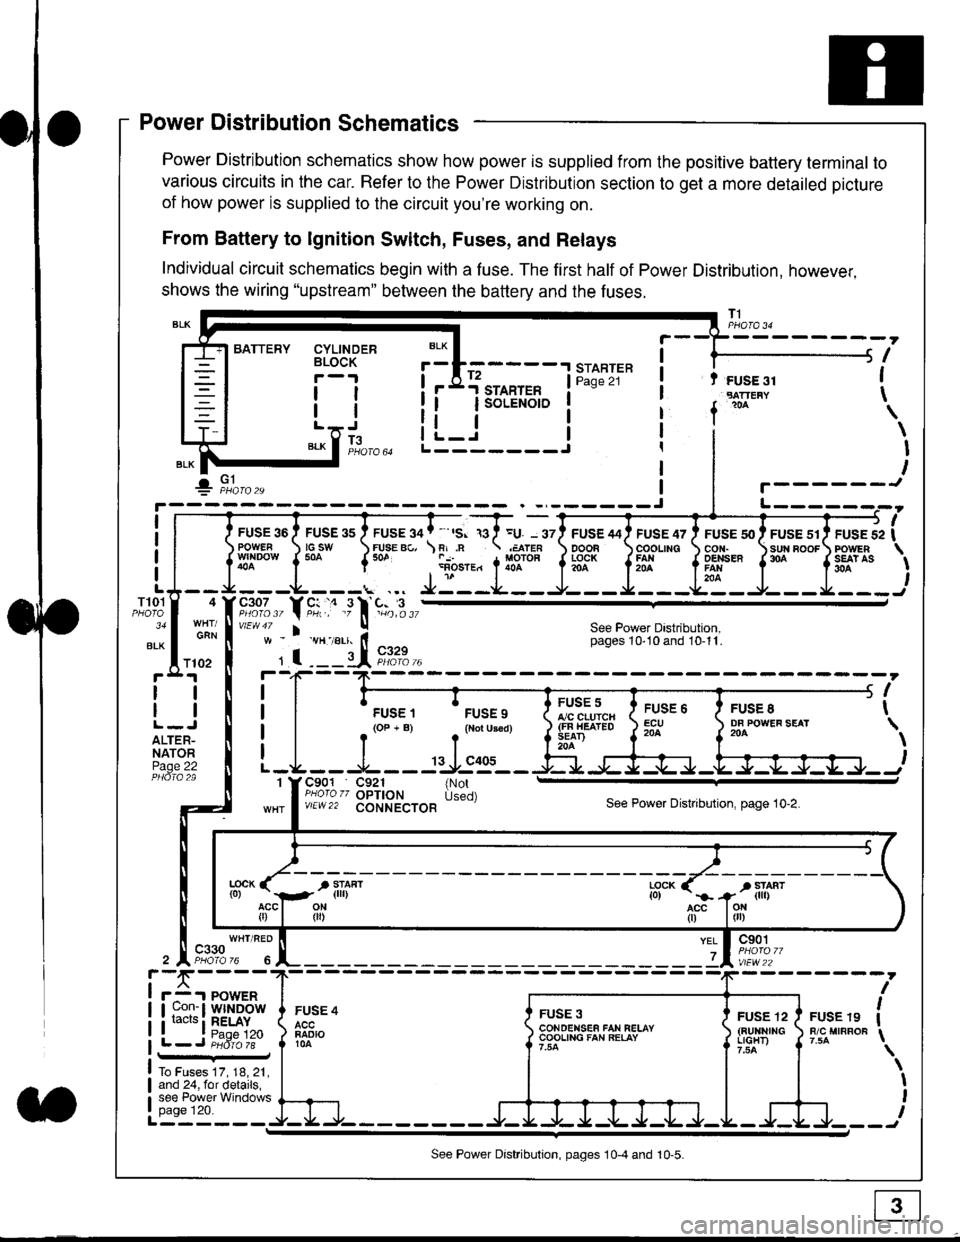 HONDA CIVIC 1996 6.G Workshop Manual Power Distribution Schematics
Power Distribution schematics show how power is supplied from the positive battery terminal to
various circuits in the car. Refer to the Power Distribution section to get